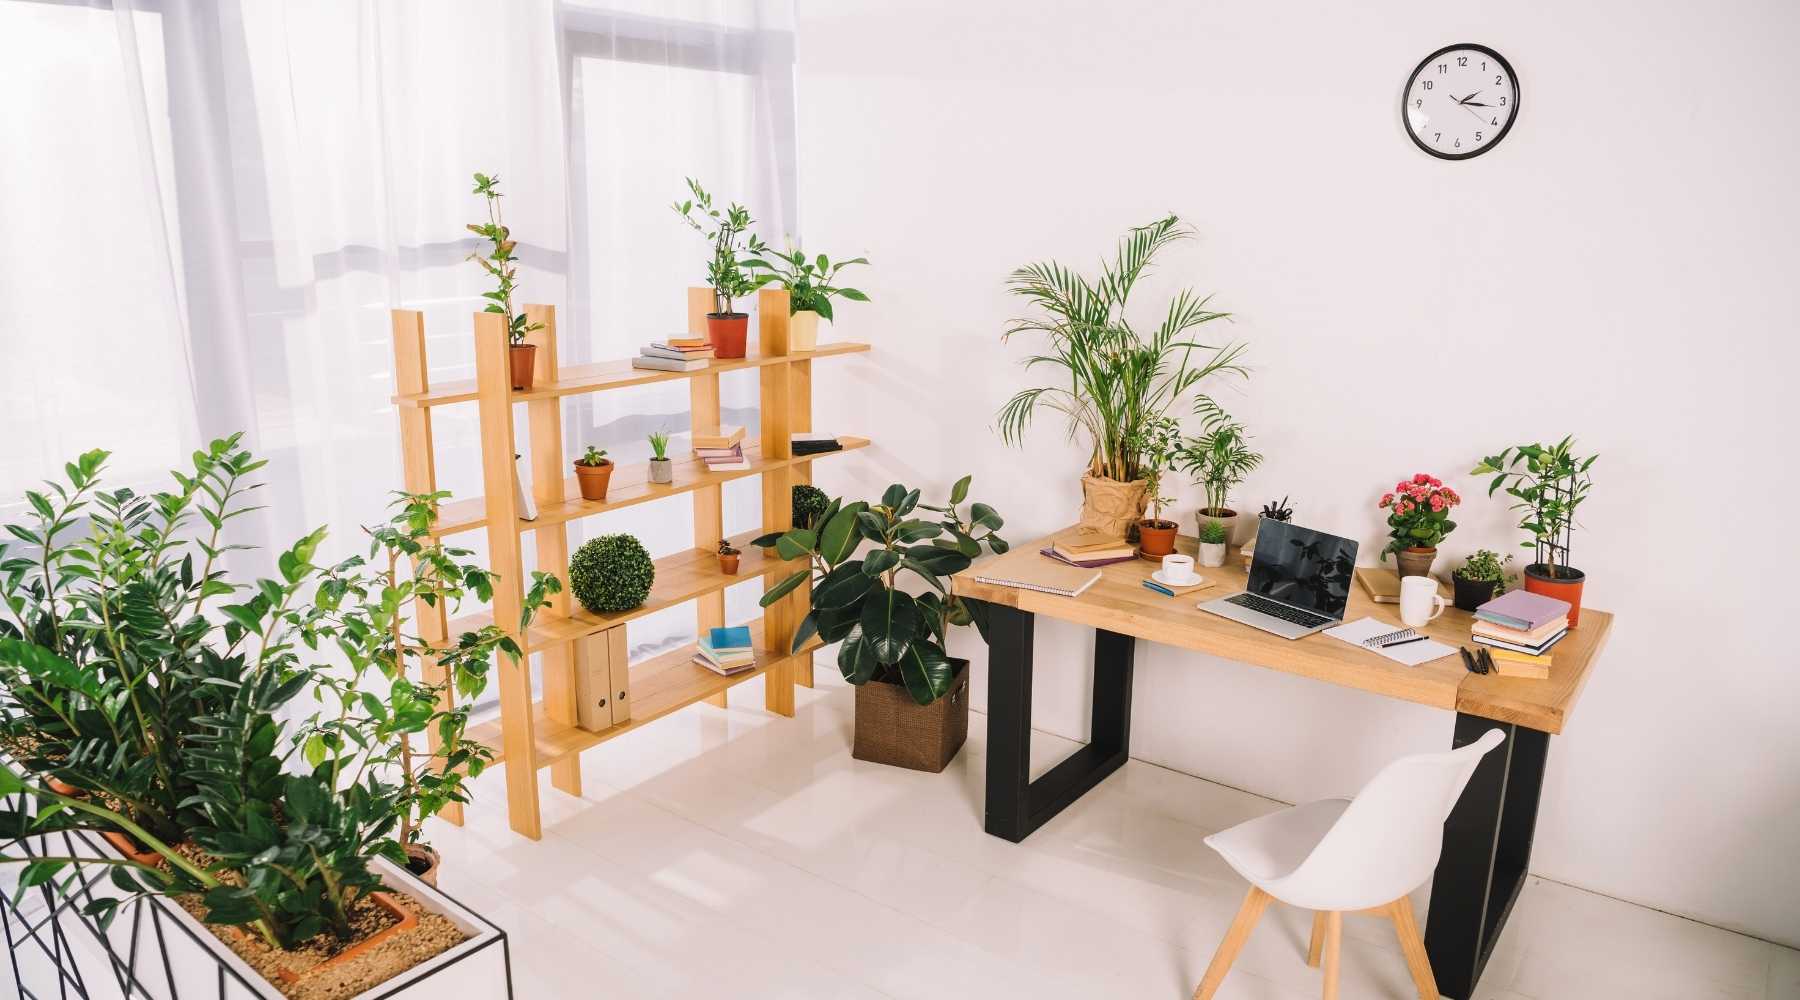 10 Best Low Light Plants For Office That Are Also Low Maintenance